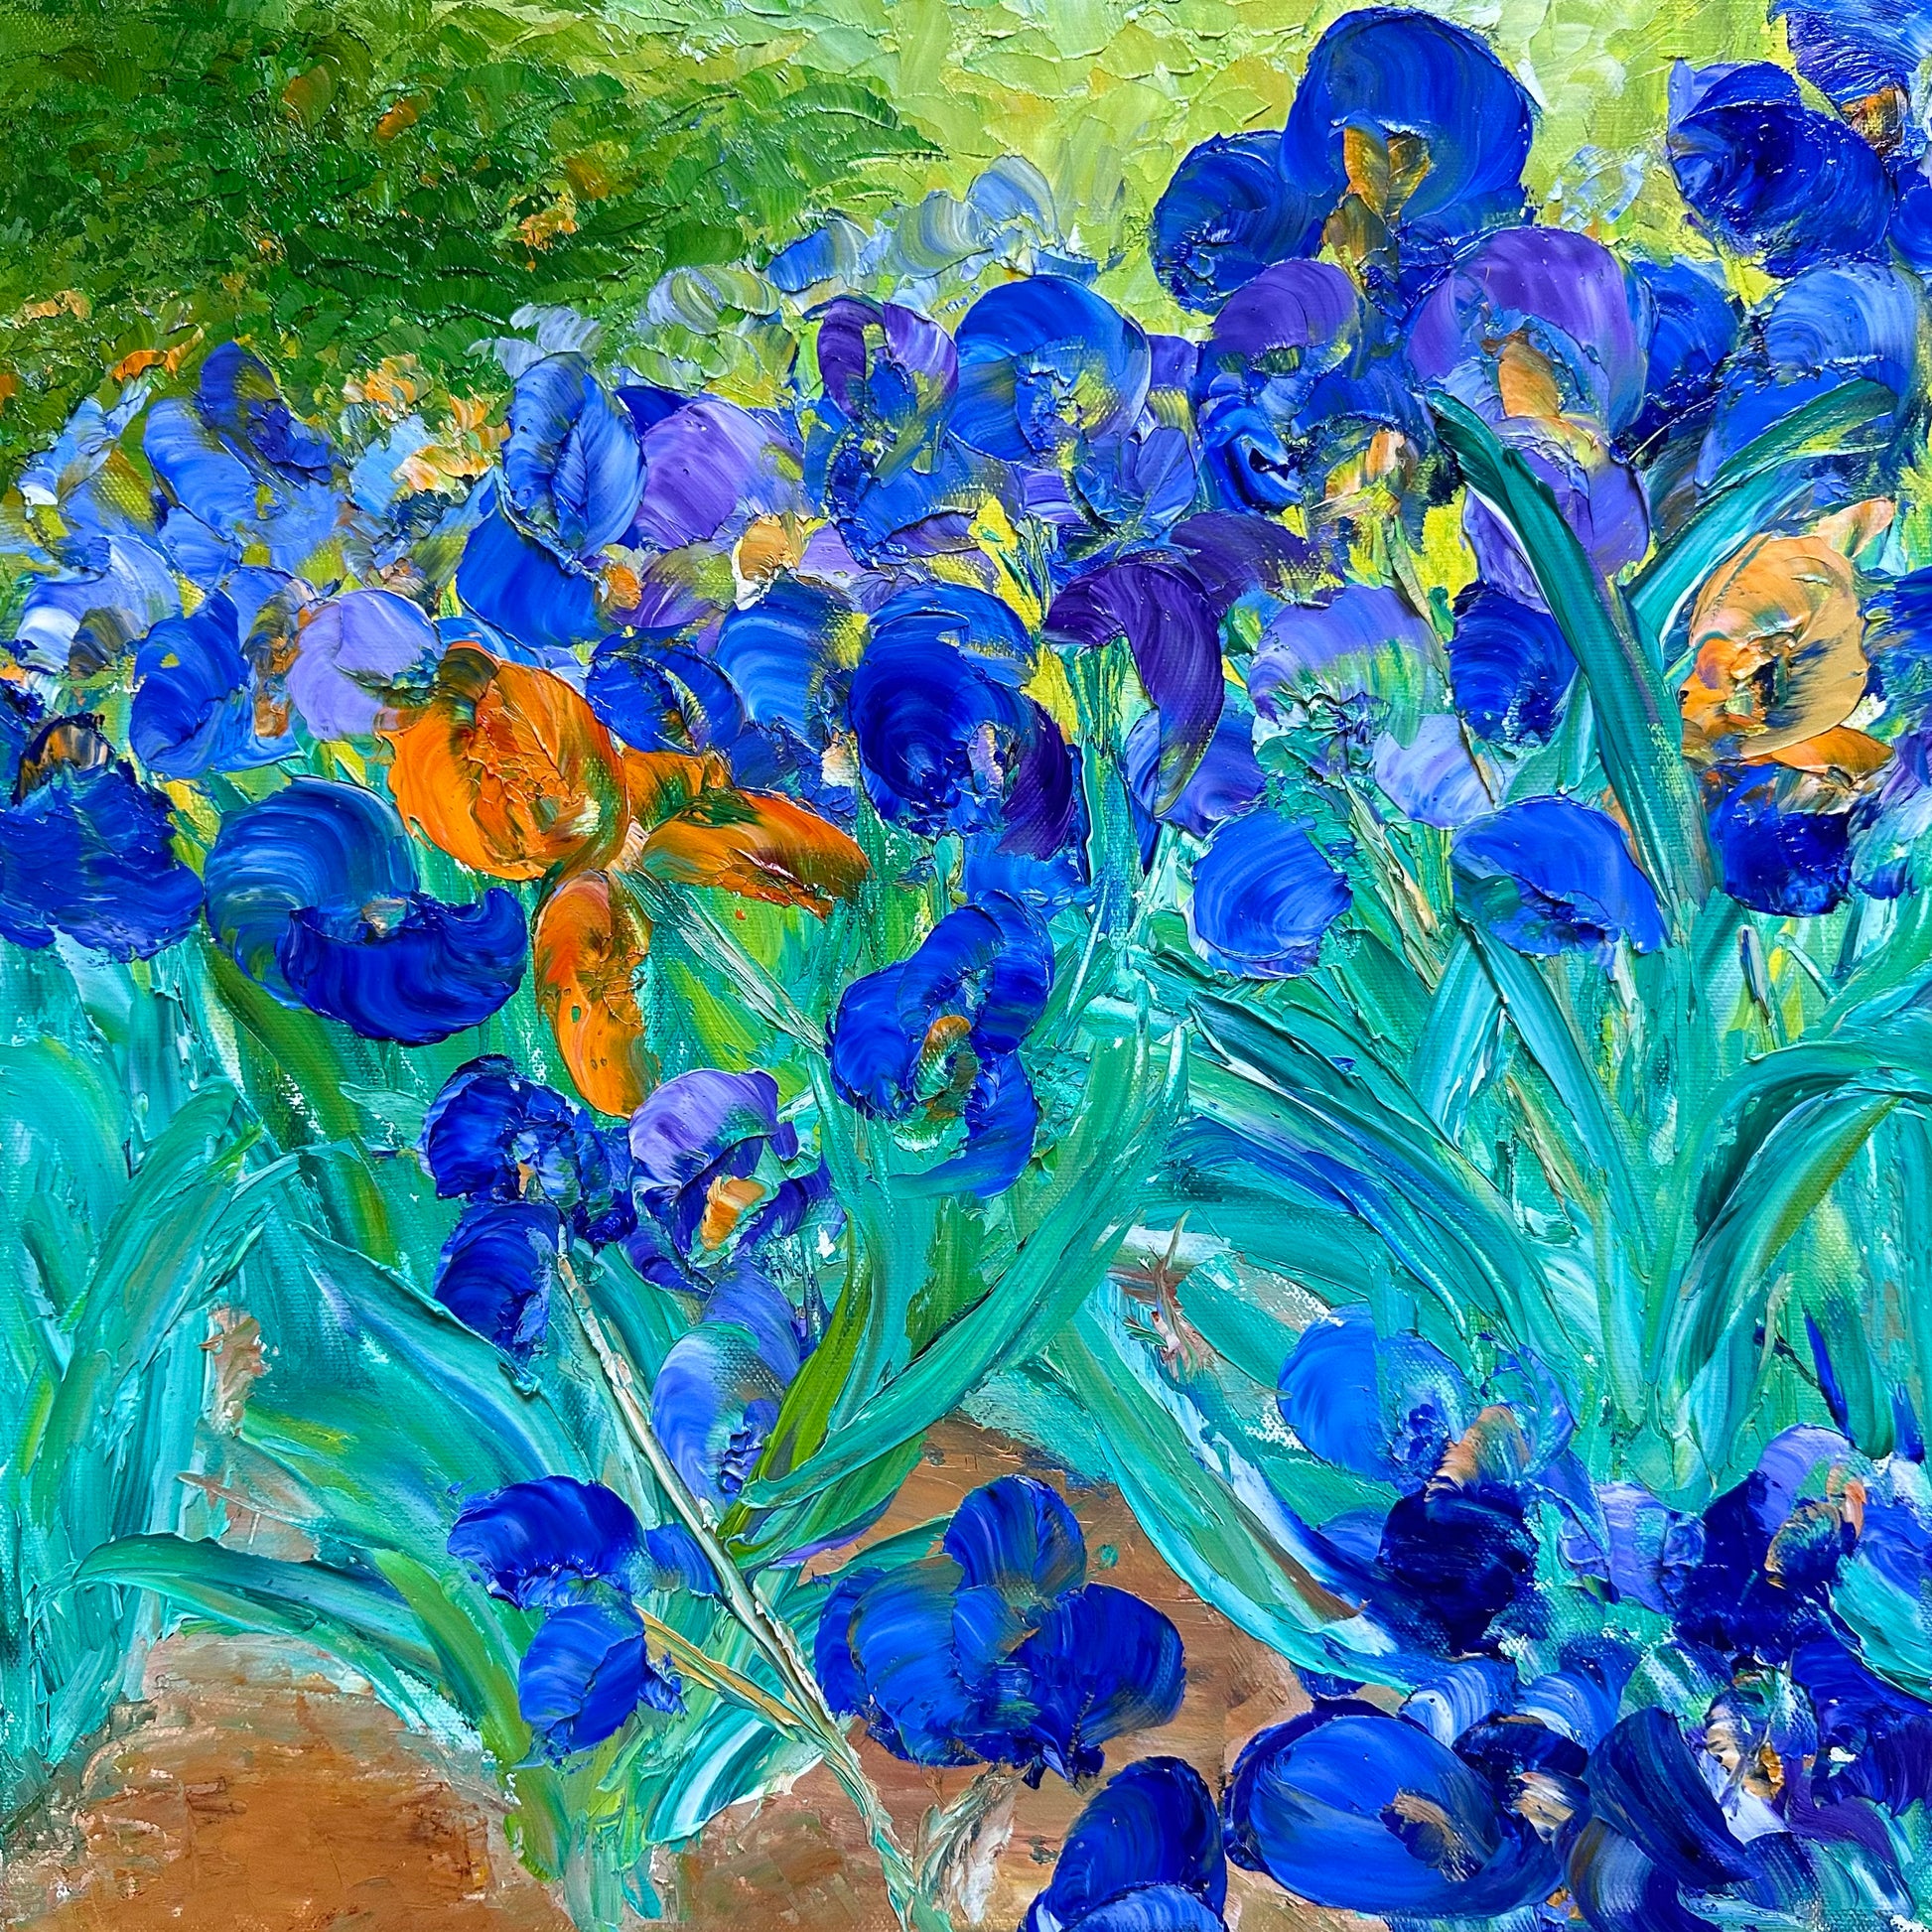 Abstract impressionist oil painting of Blue Irises created in Washington, DC by Maria-Victoria Checa on Friday, October 27th. 2023.